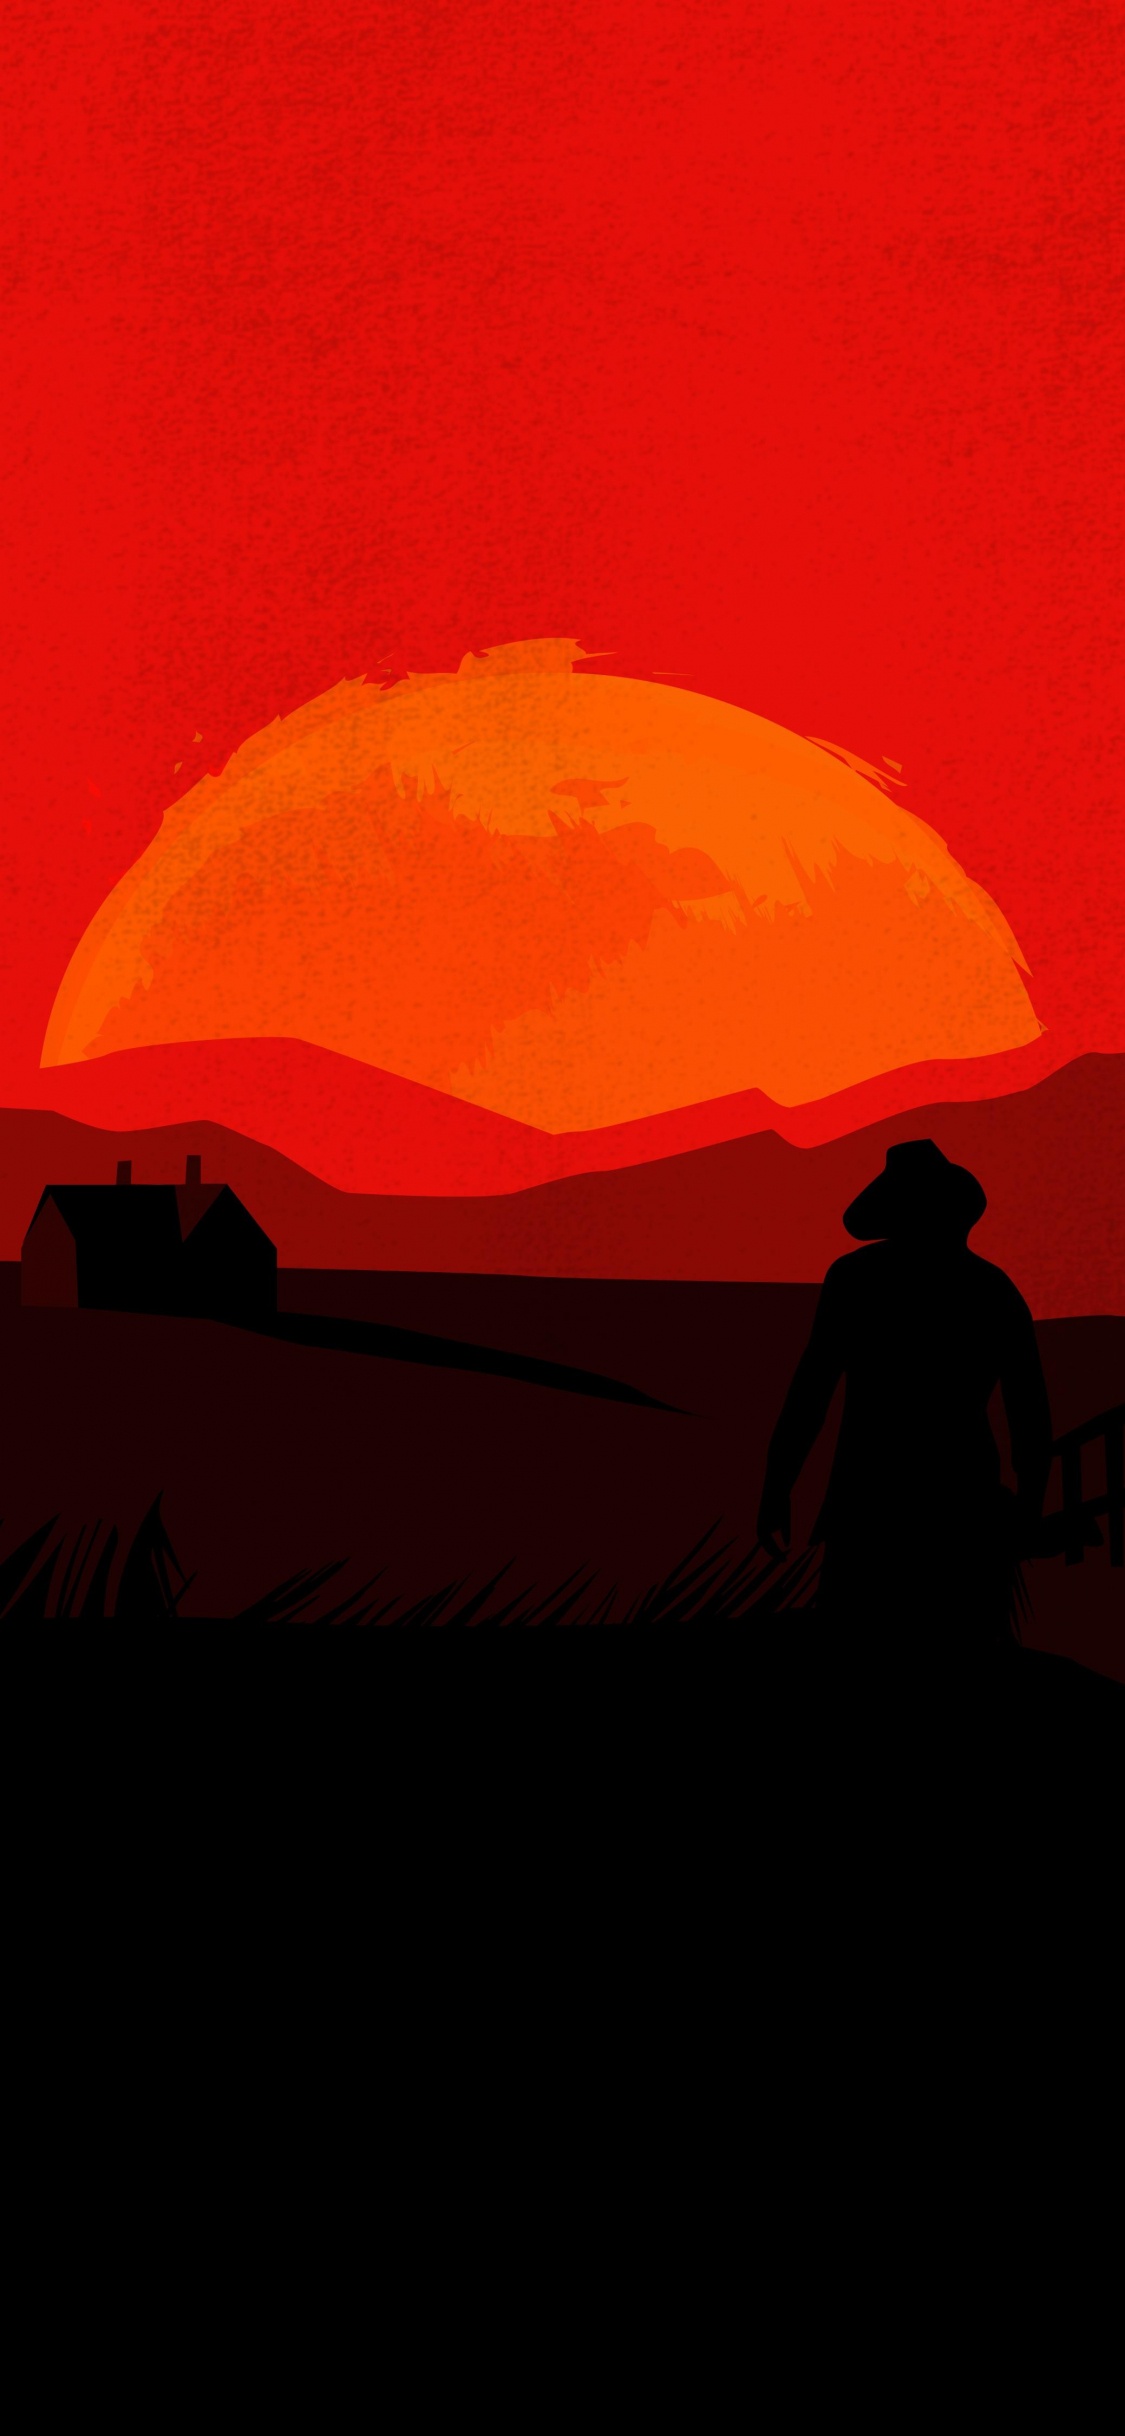 Red Dead Redemption 2, Red Dead Redemption, Red, Afterglow, Lever. Wallpaper in 1125x2436 Resolution